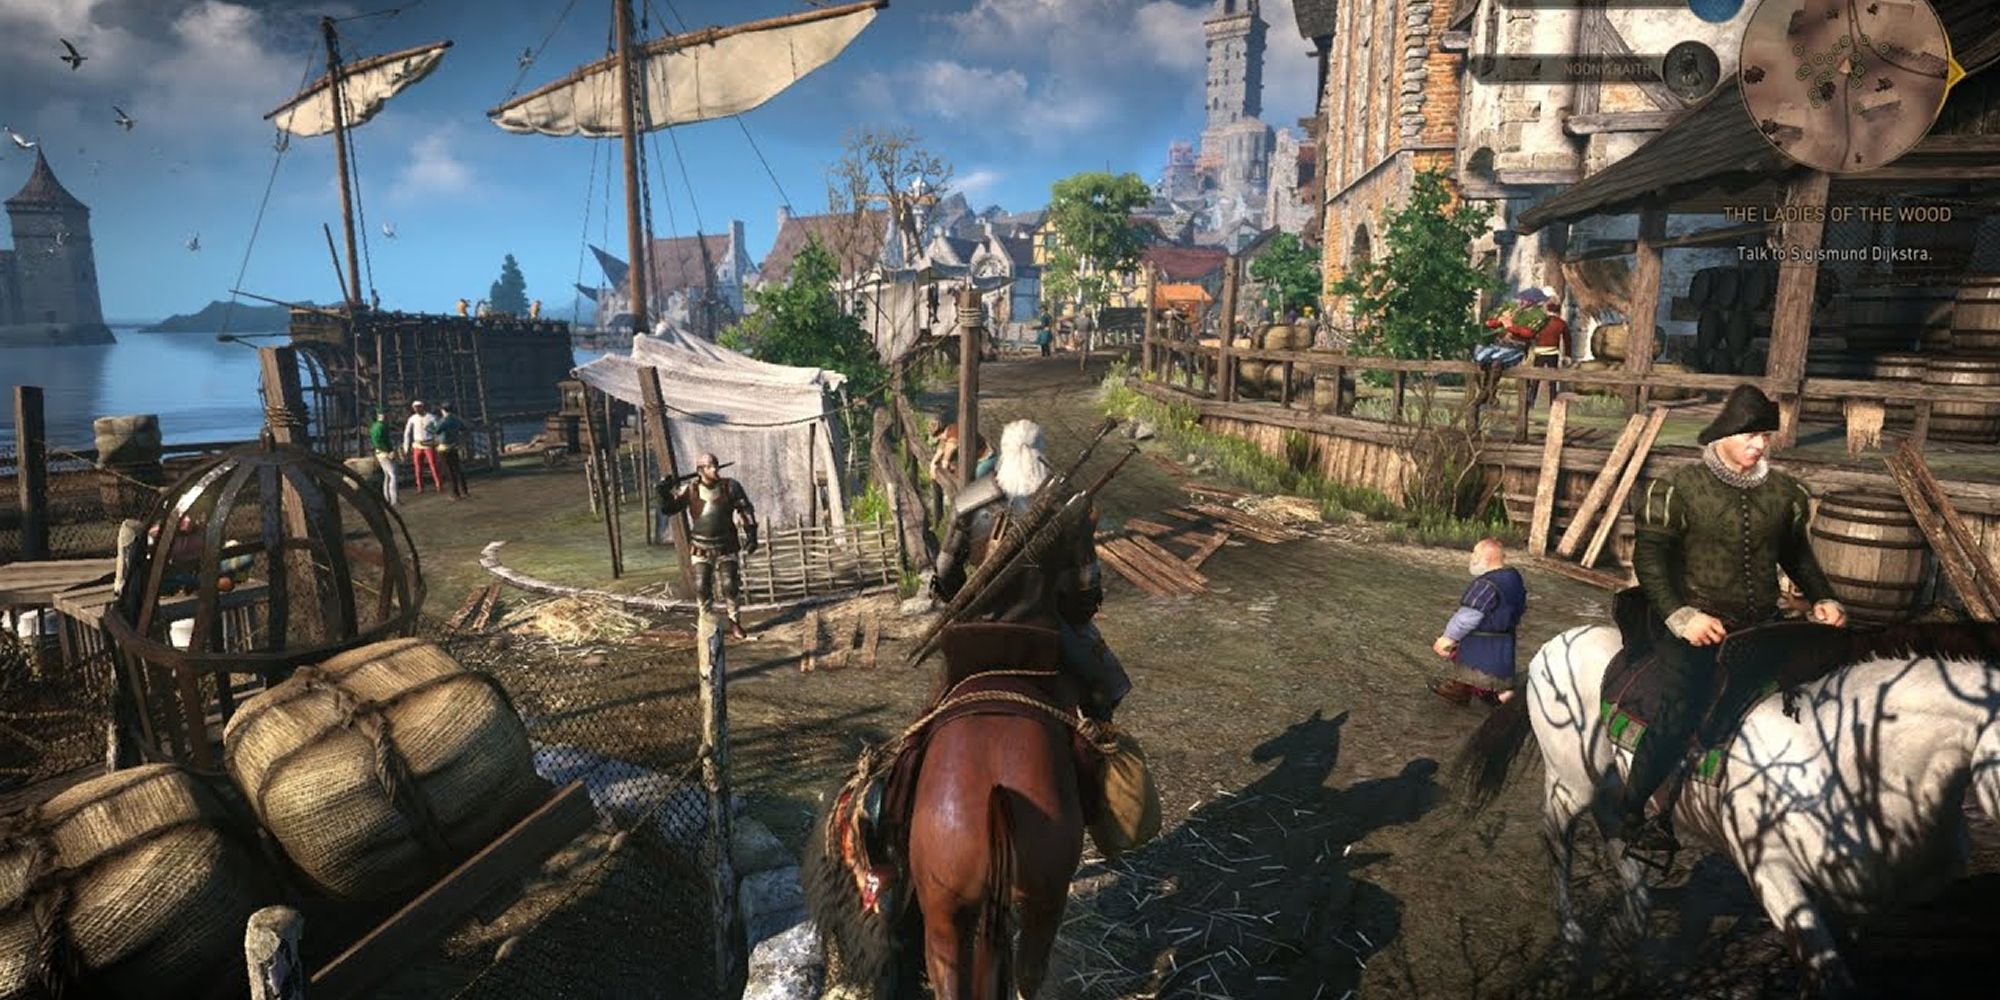 The Witcher 3 Geralt on his horse in the city